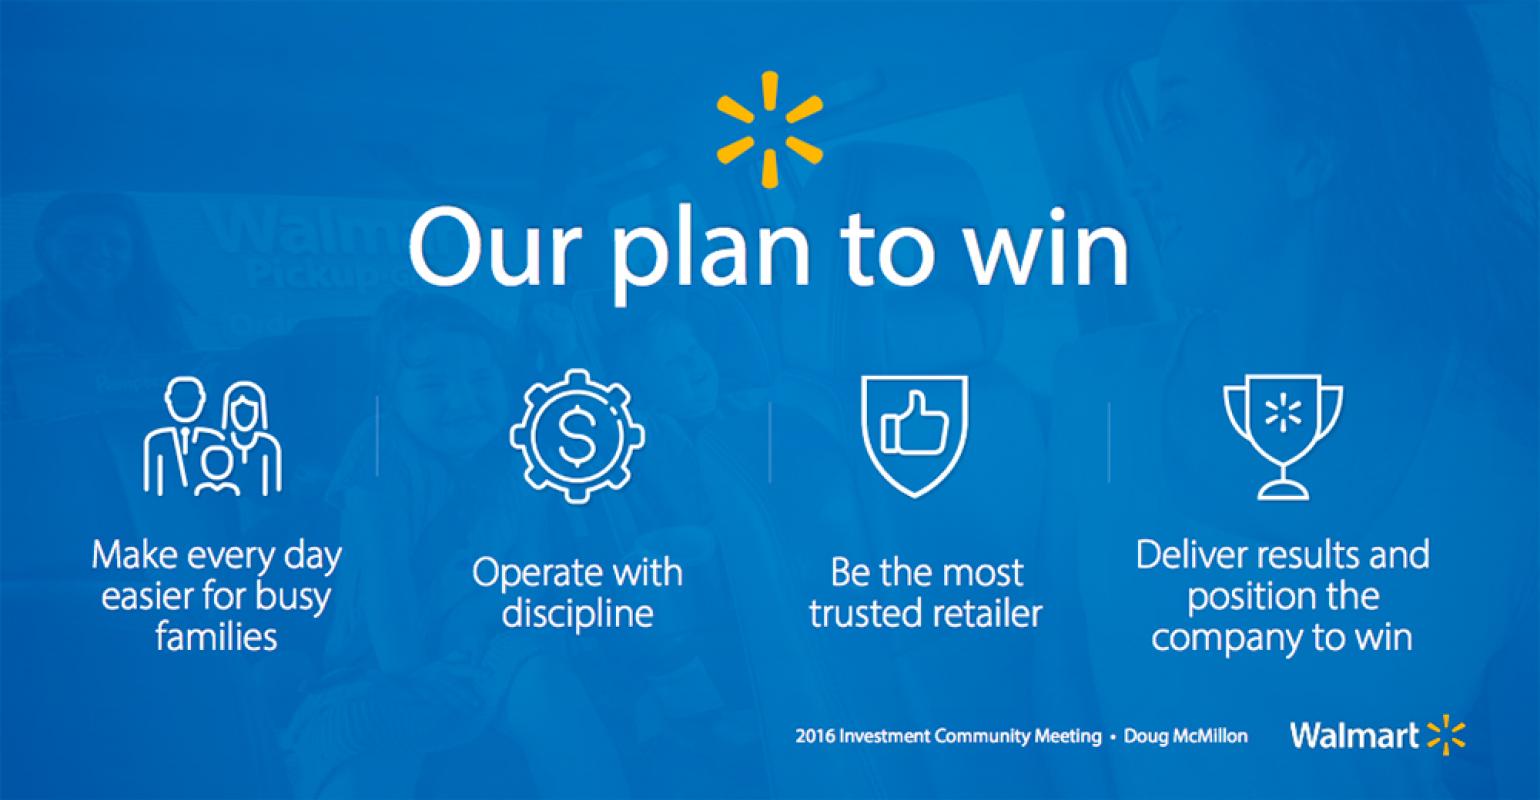 Walmart to investors Investments will be worth it Supermarket News